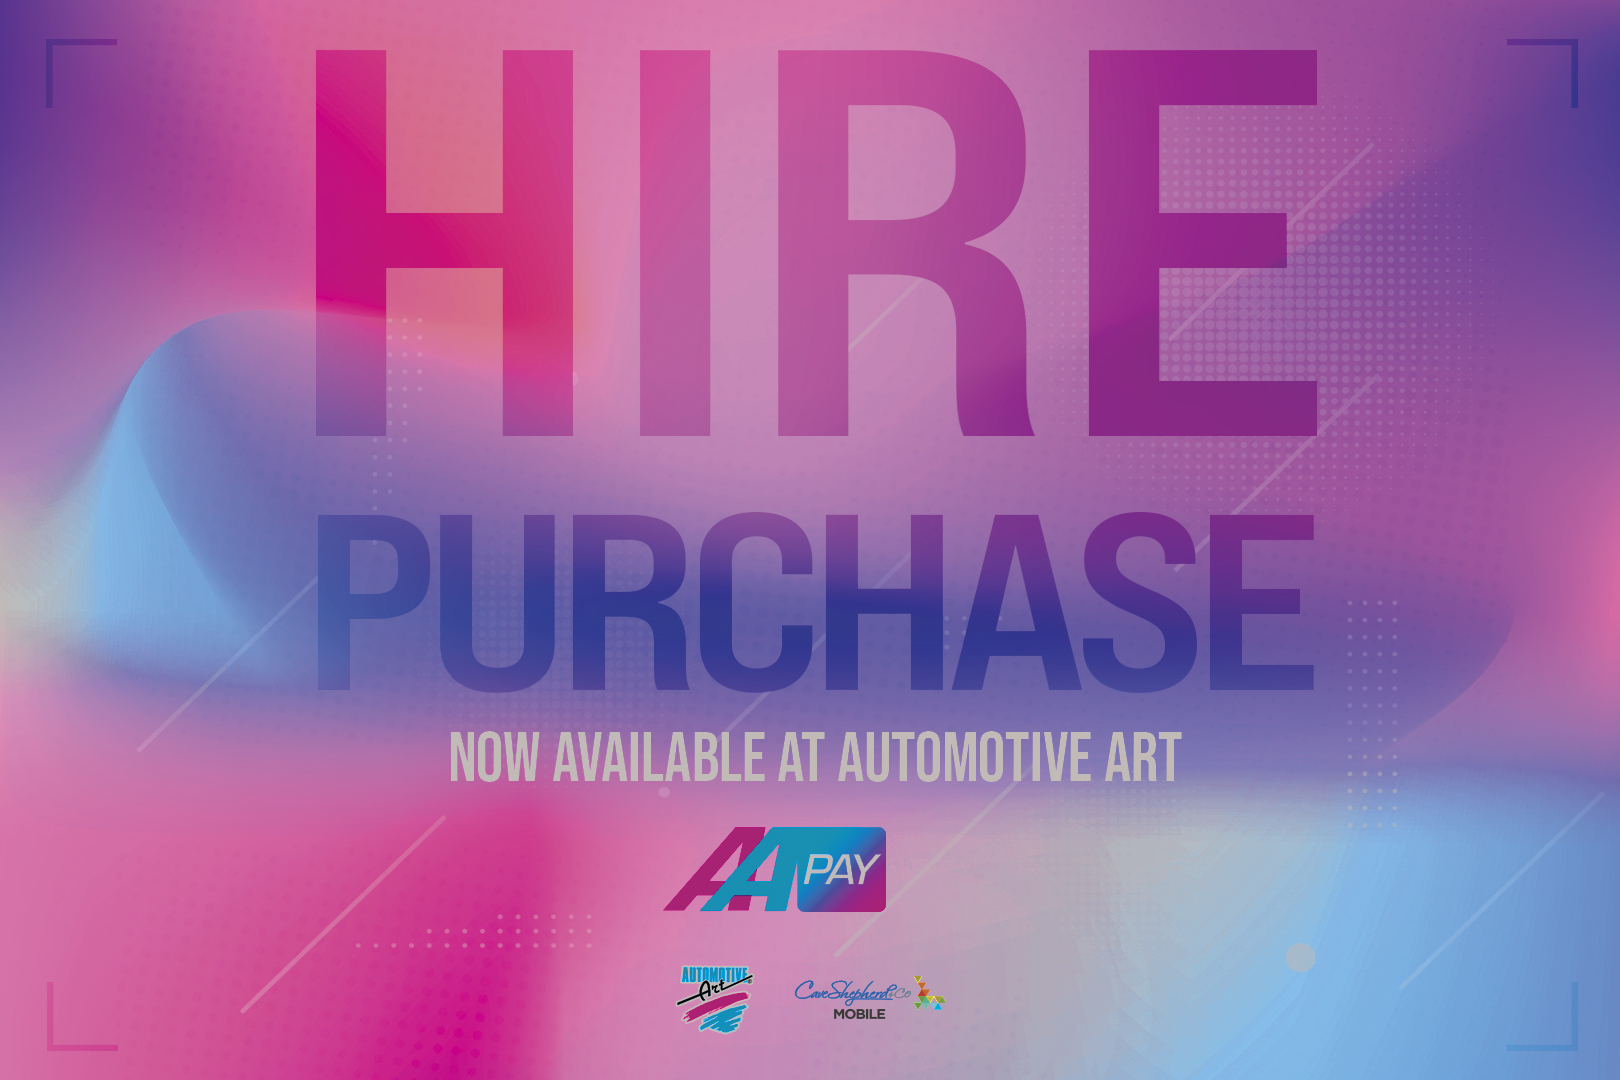 Hire purchase now available at Automotive Art!